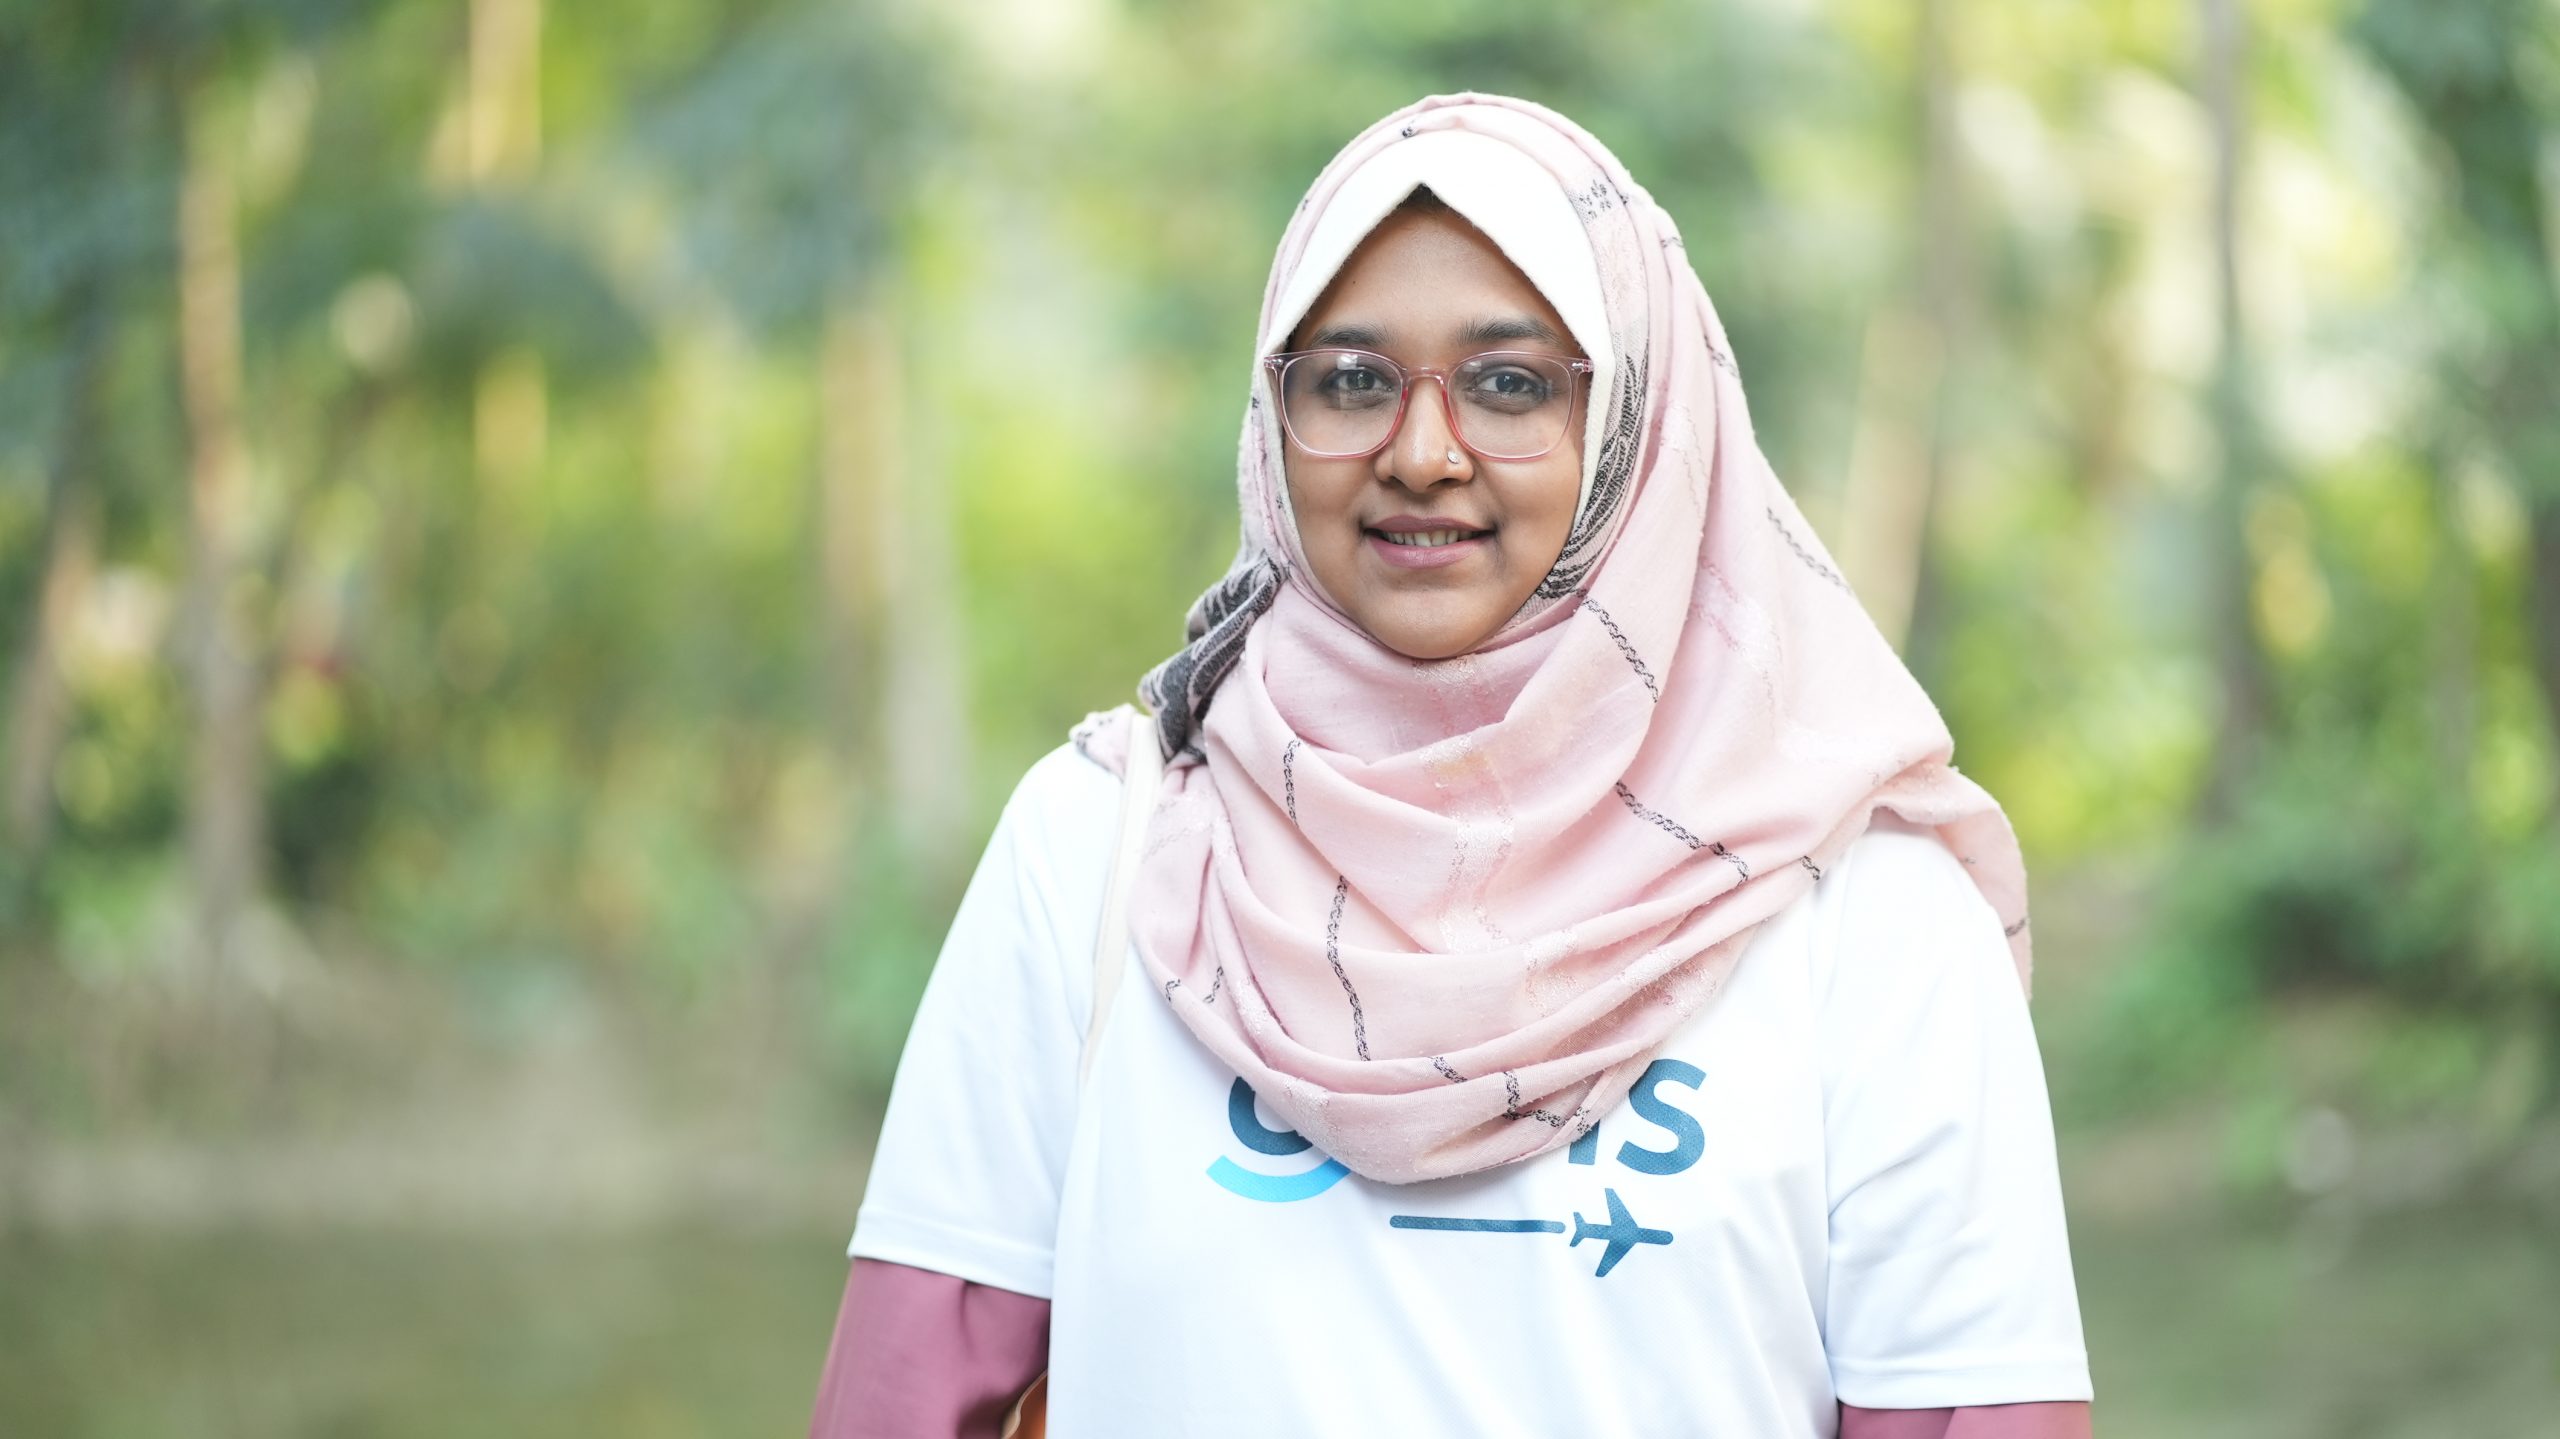 Tasmia received training from Orbis and runs a women-led green vision centre in the sub-district of Haimchar, Bangladesh